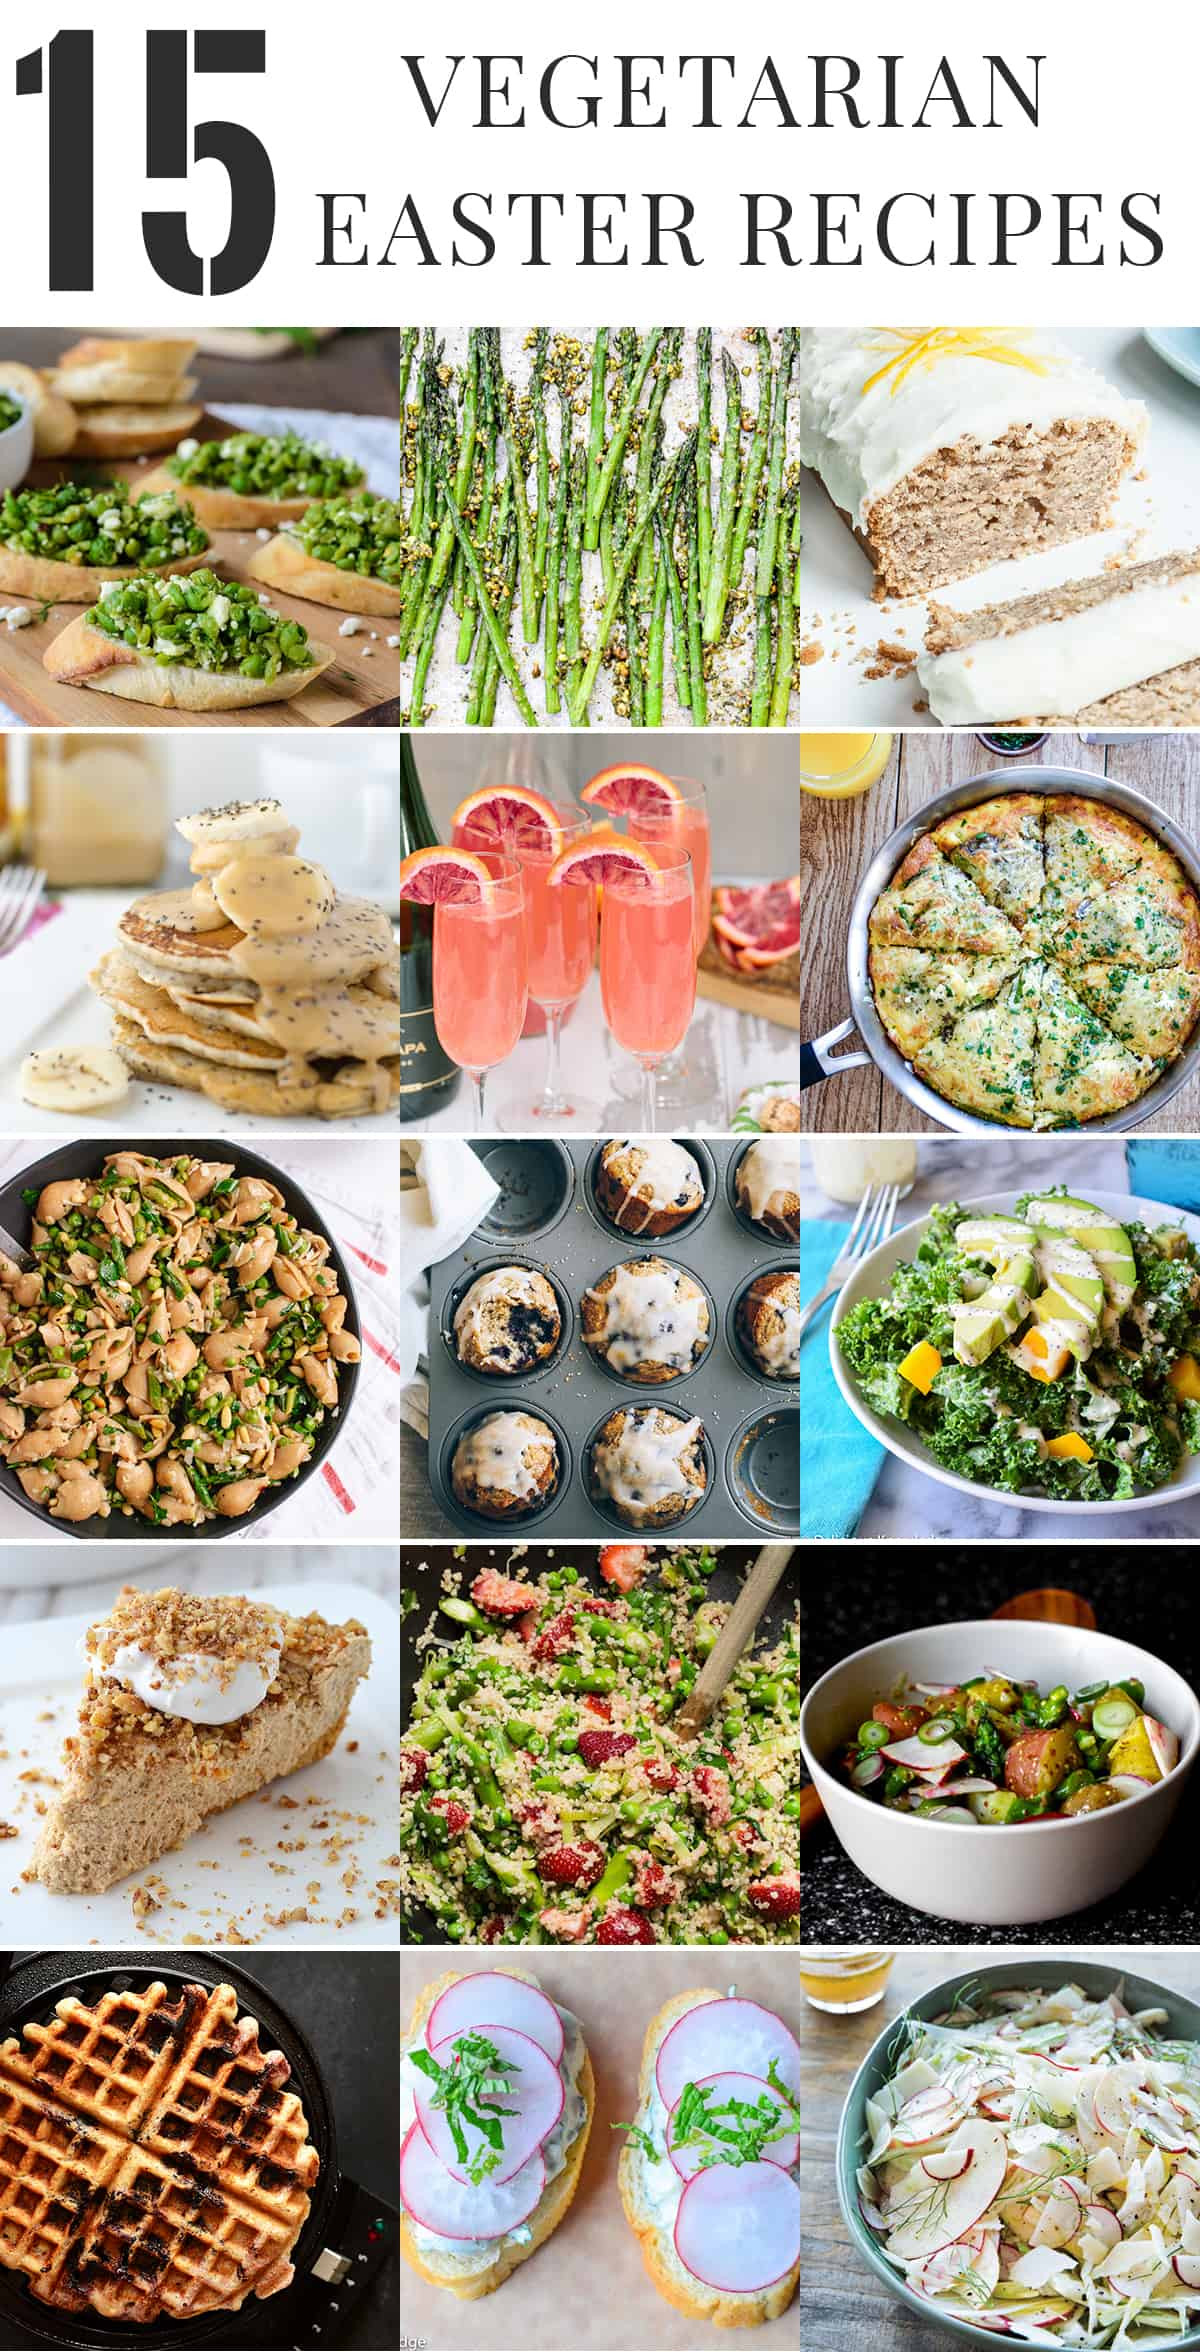 Vegetarian Easter Recipes
 Healthy Ve arian Easter Recipes Delish Knowledge